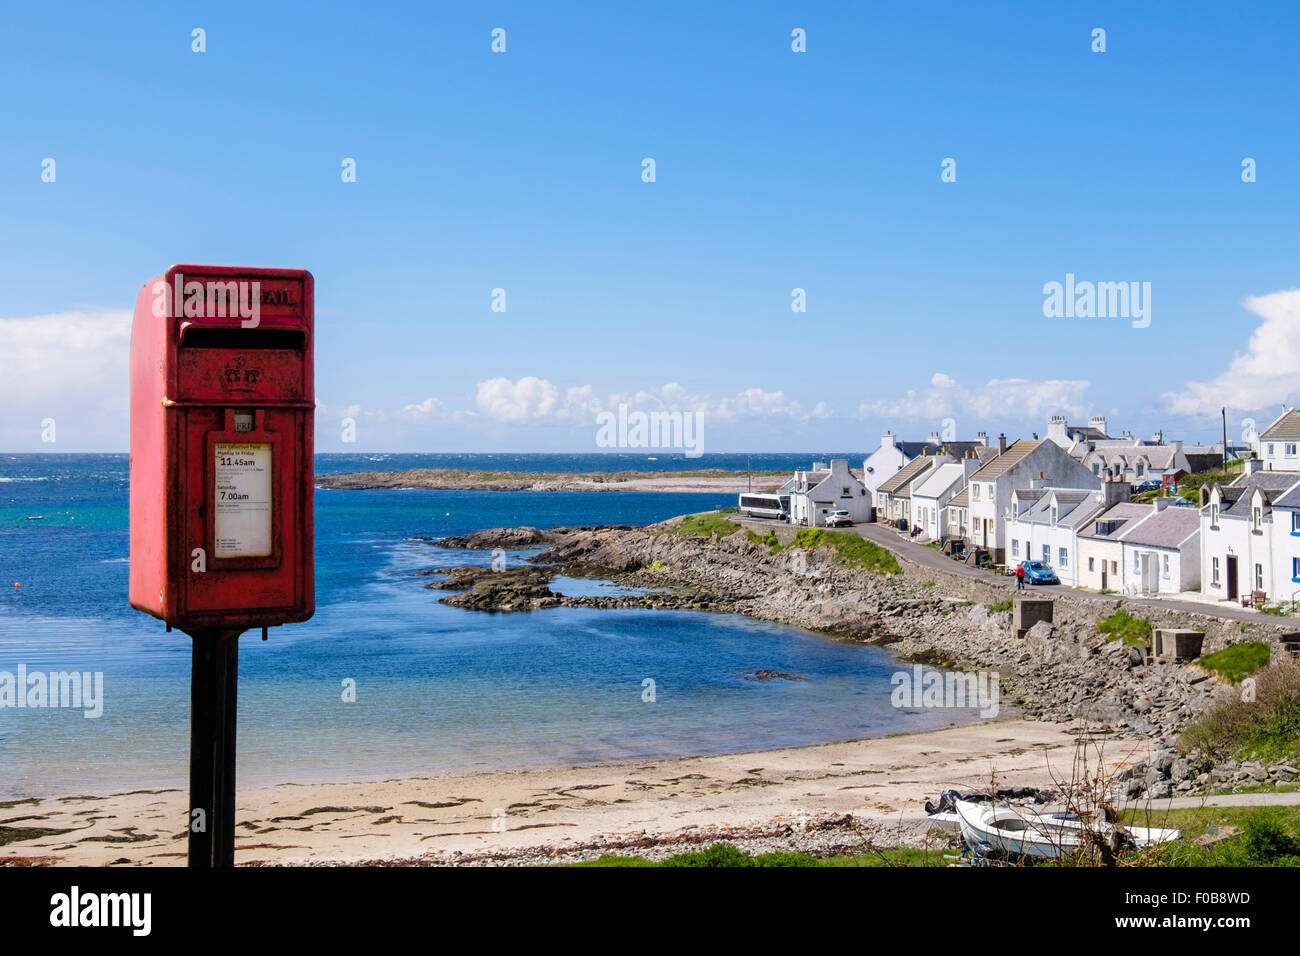 Red postbox outside Post Office on seafront in Portnahaven, Isle of Islay, Inner Hebrides, Western Isles, Scotland, UK, Britain Stock Photo